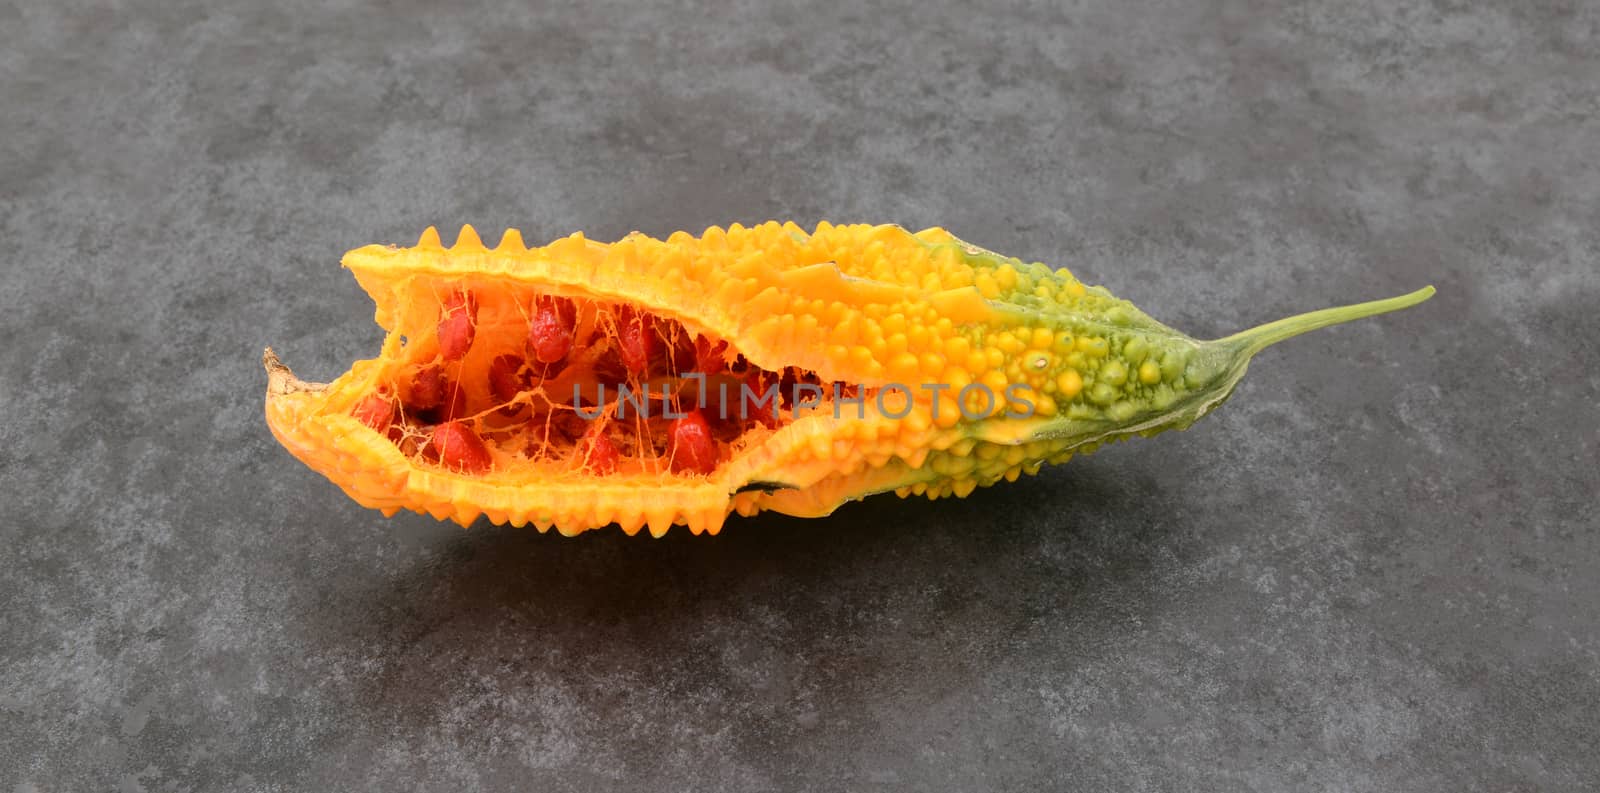 Orange bitter gourd, with ridged flesh, split open to show red seeds, on slate gray background